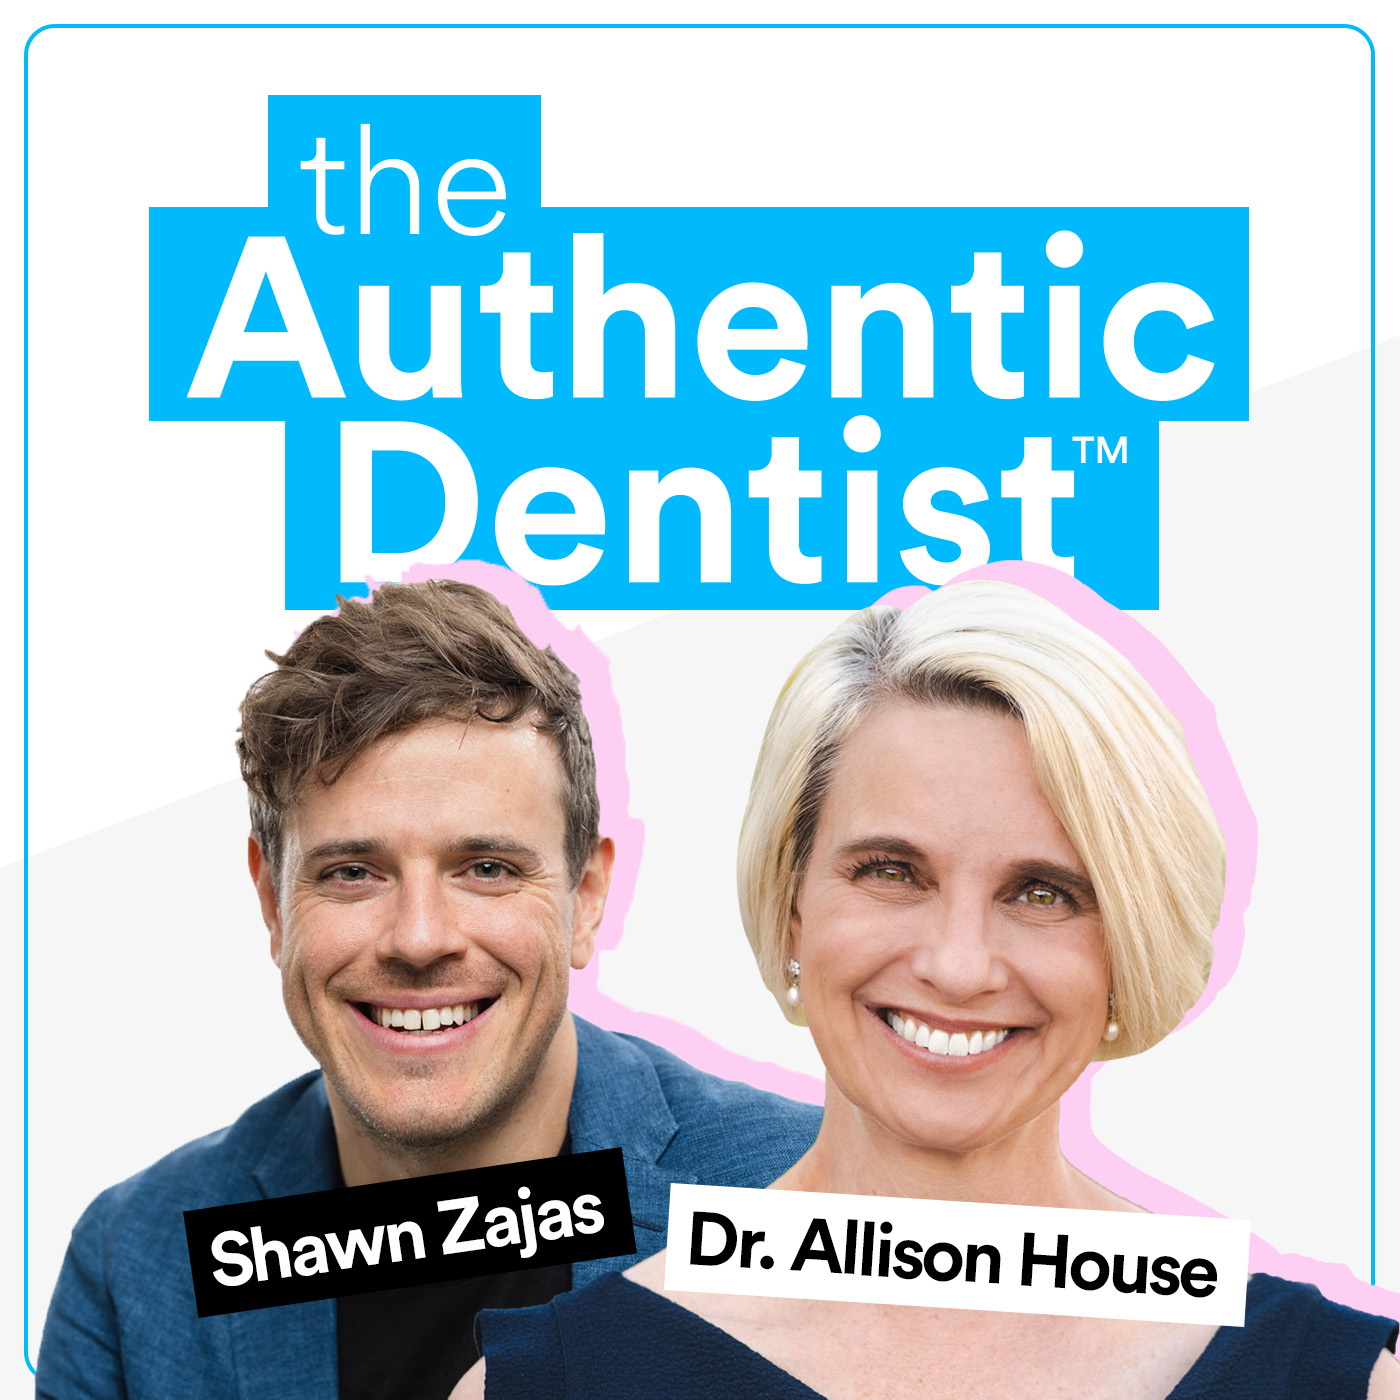 Artwork for The Authentic Dentist